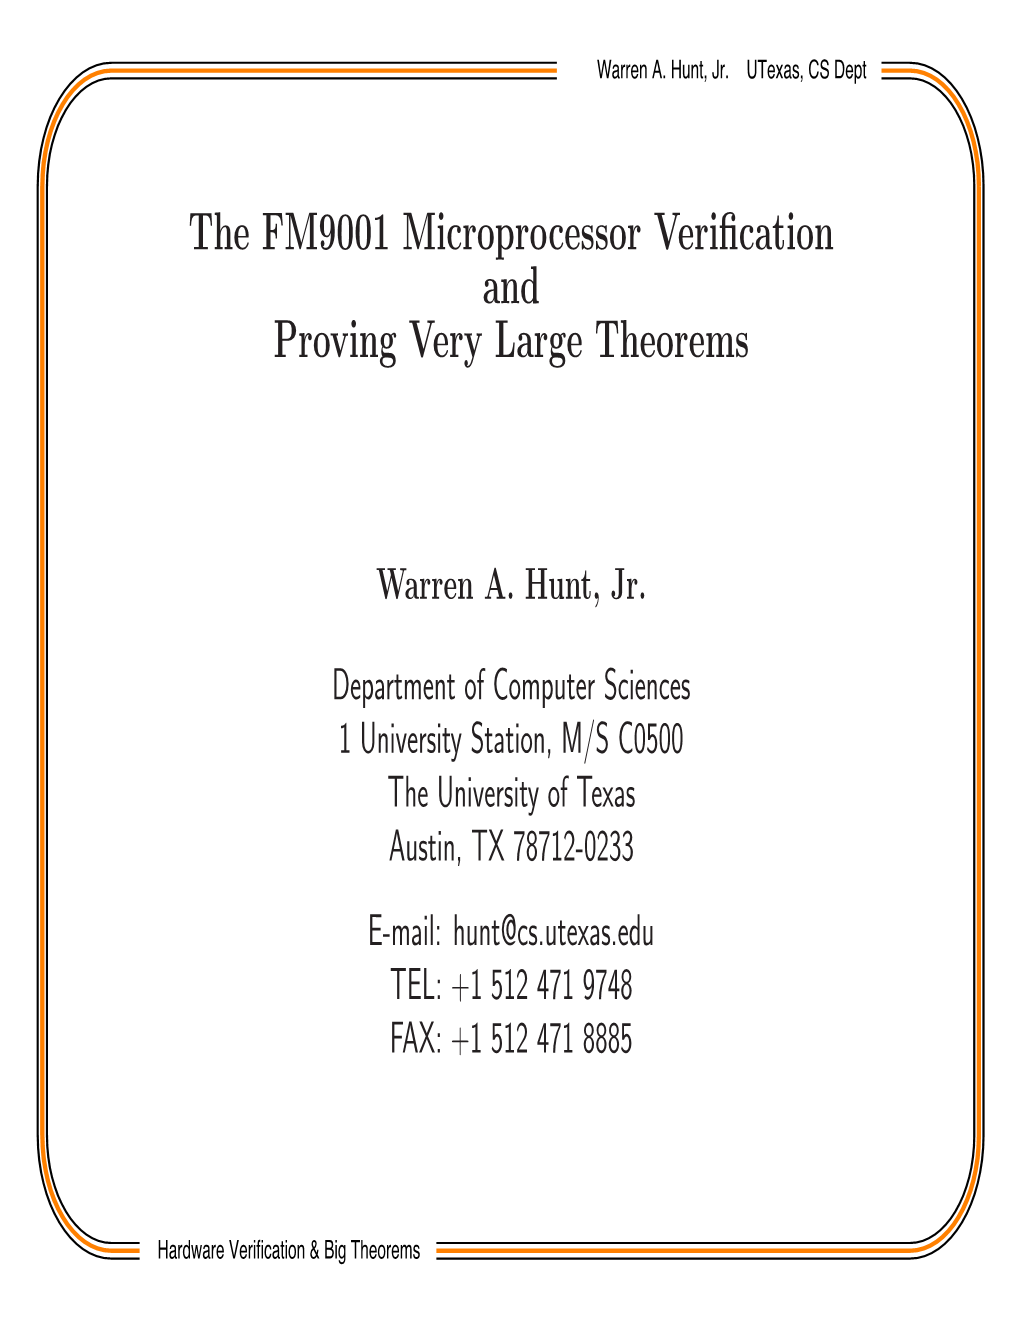 The FM9001 Microprocessor Verification and Proving Very Large